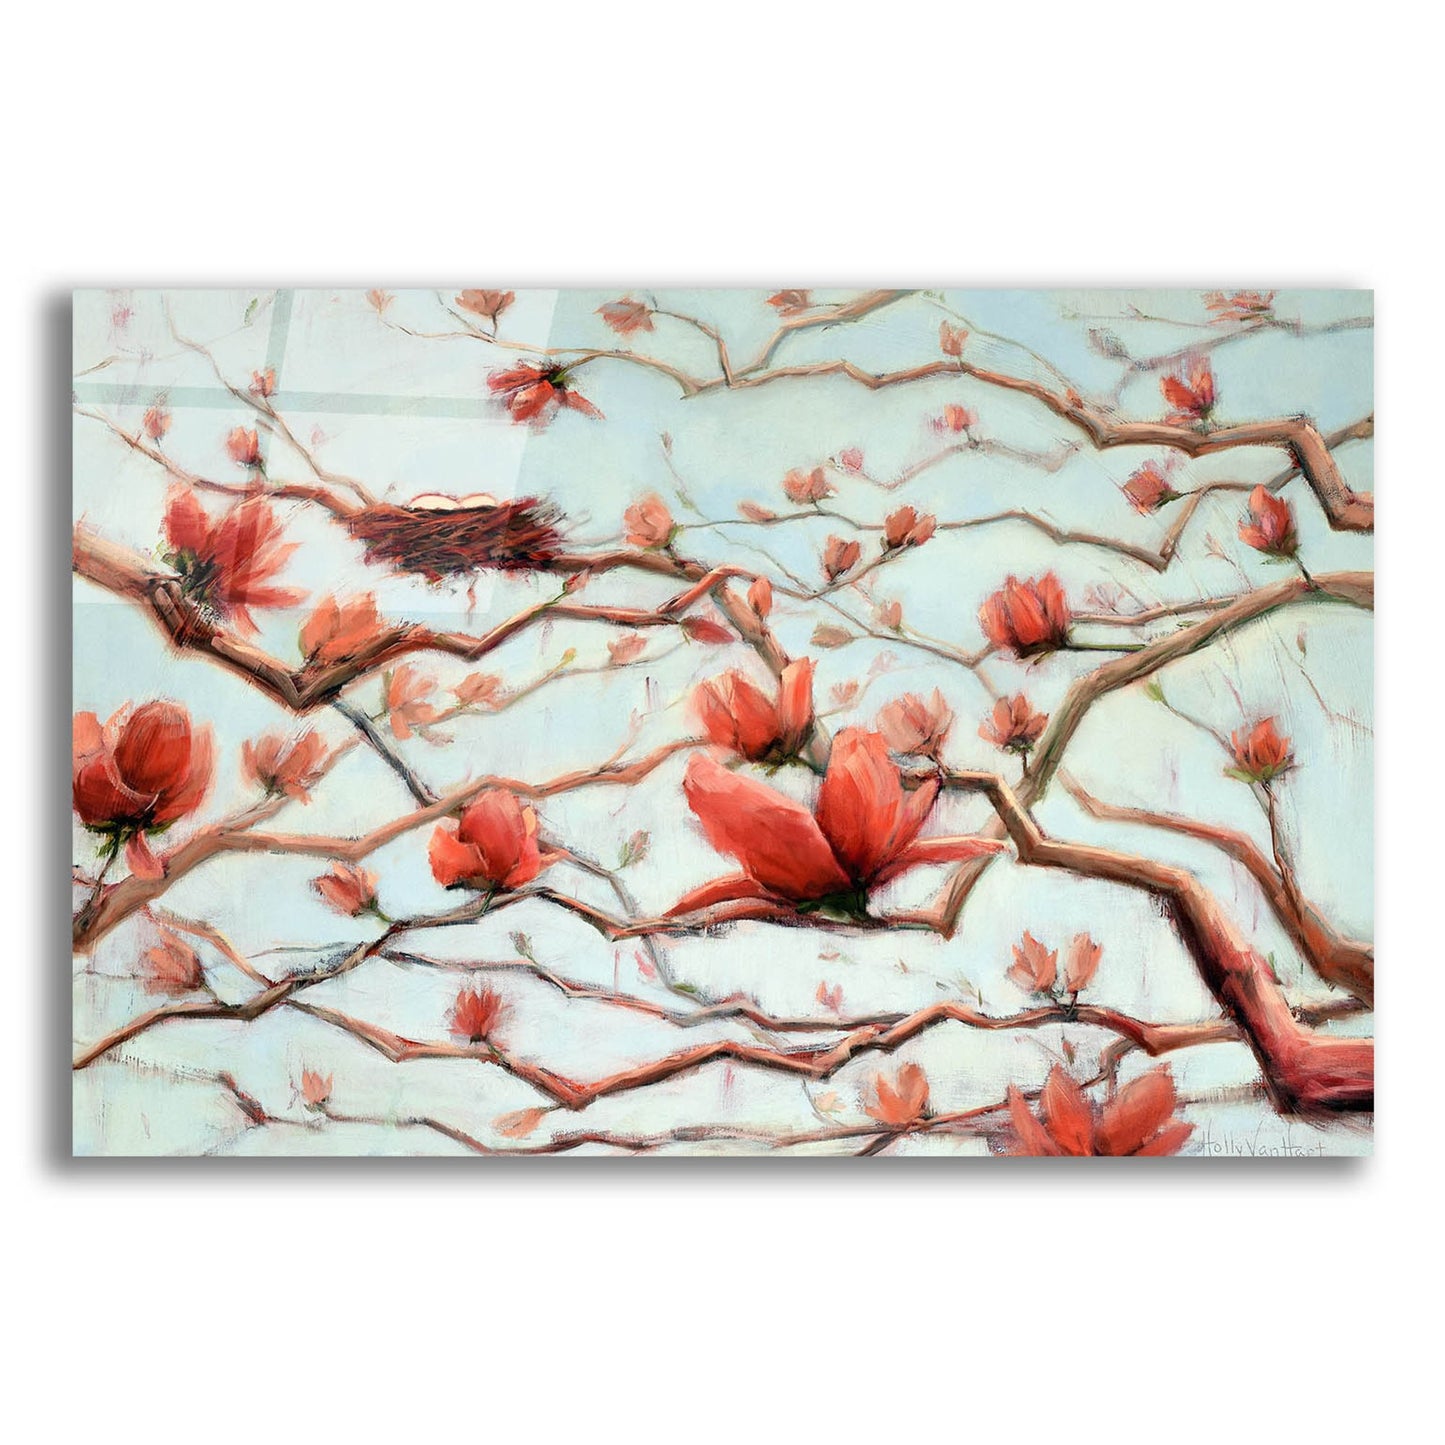 Epic Art 'Possibilities In Full Bloom' by Holly Van Hart, Acrylic Glass Wall Art,24x16